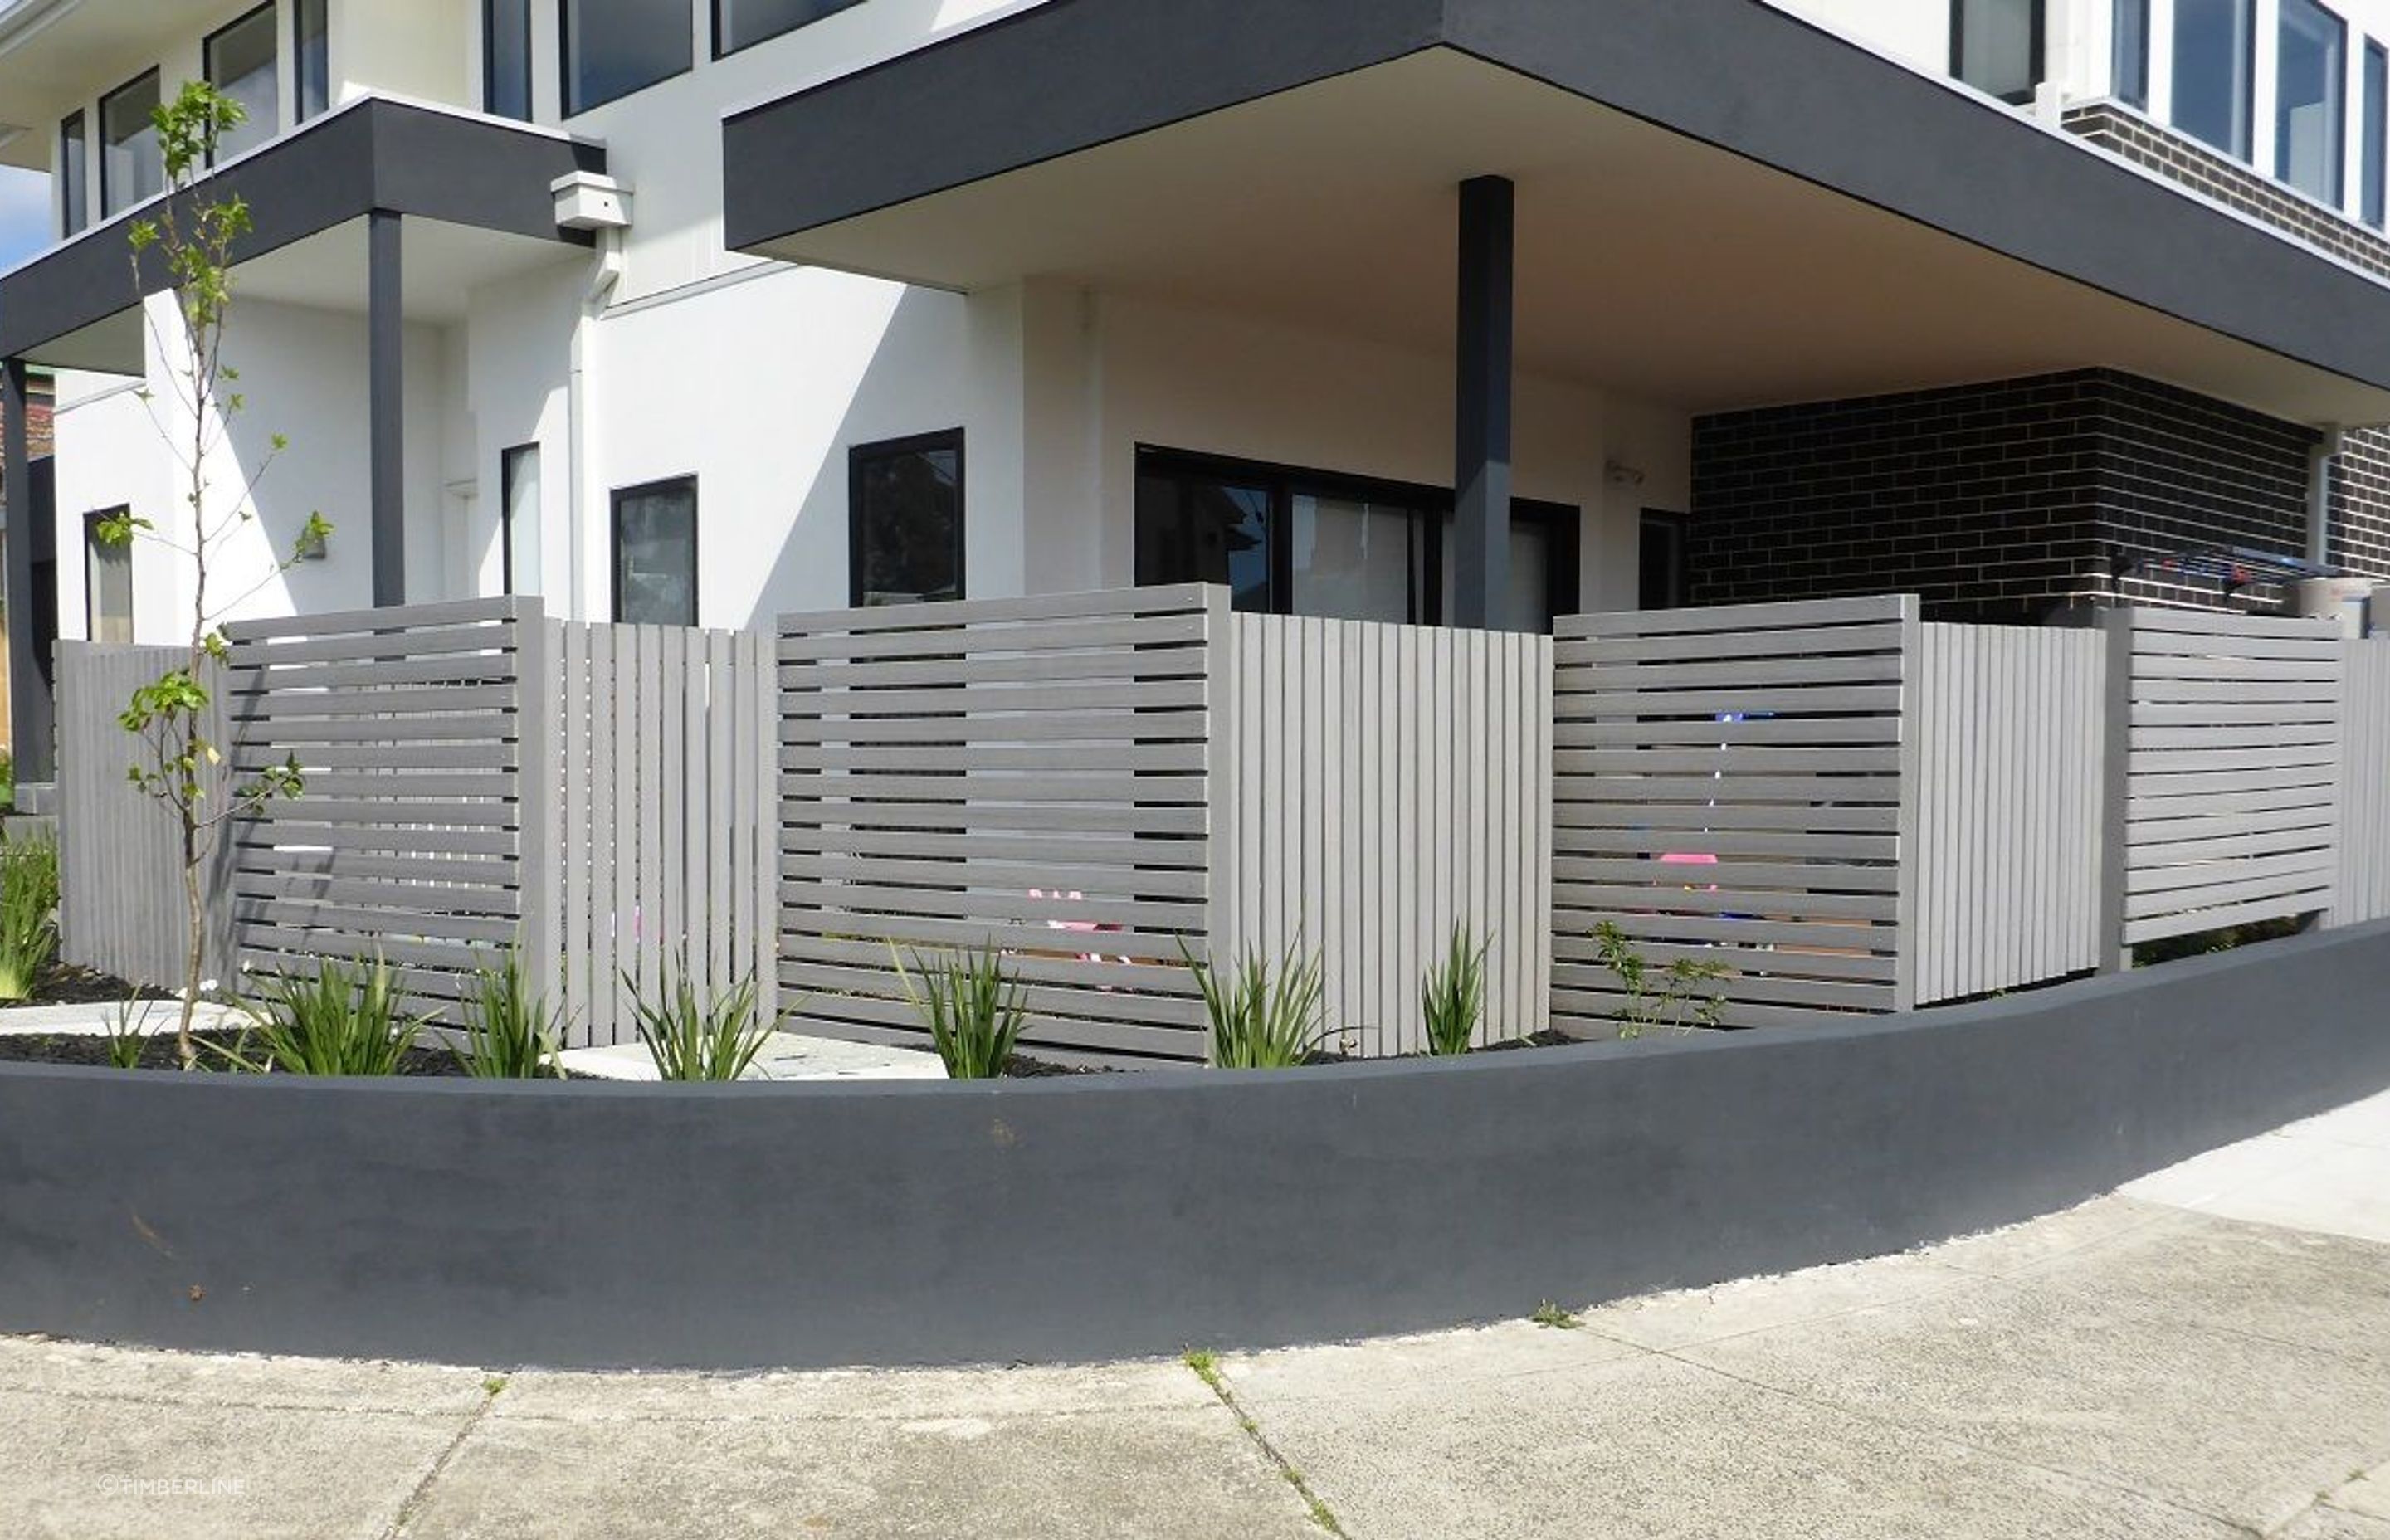 Durability plus style makes options like the ModWood Composite Fencing by Timberline an appealing choice